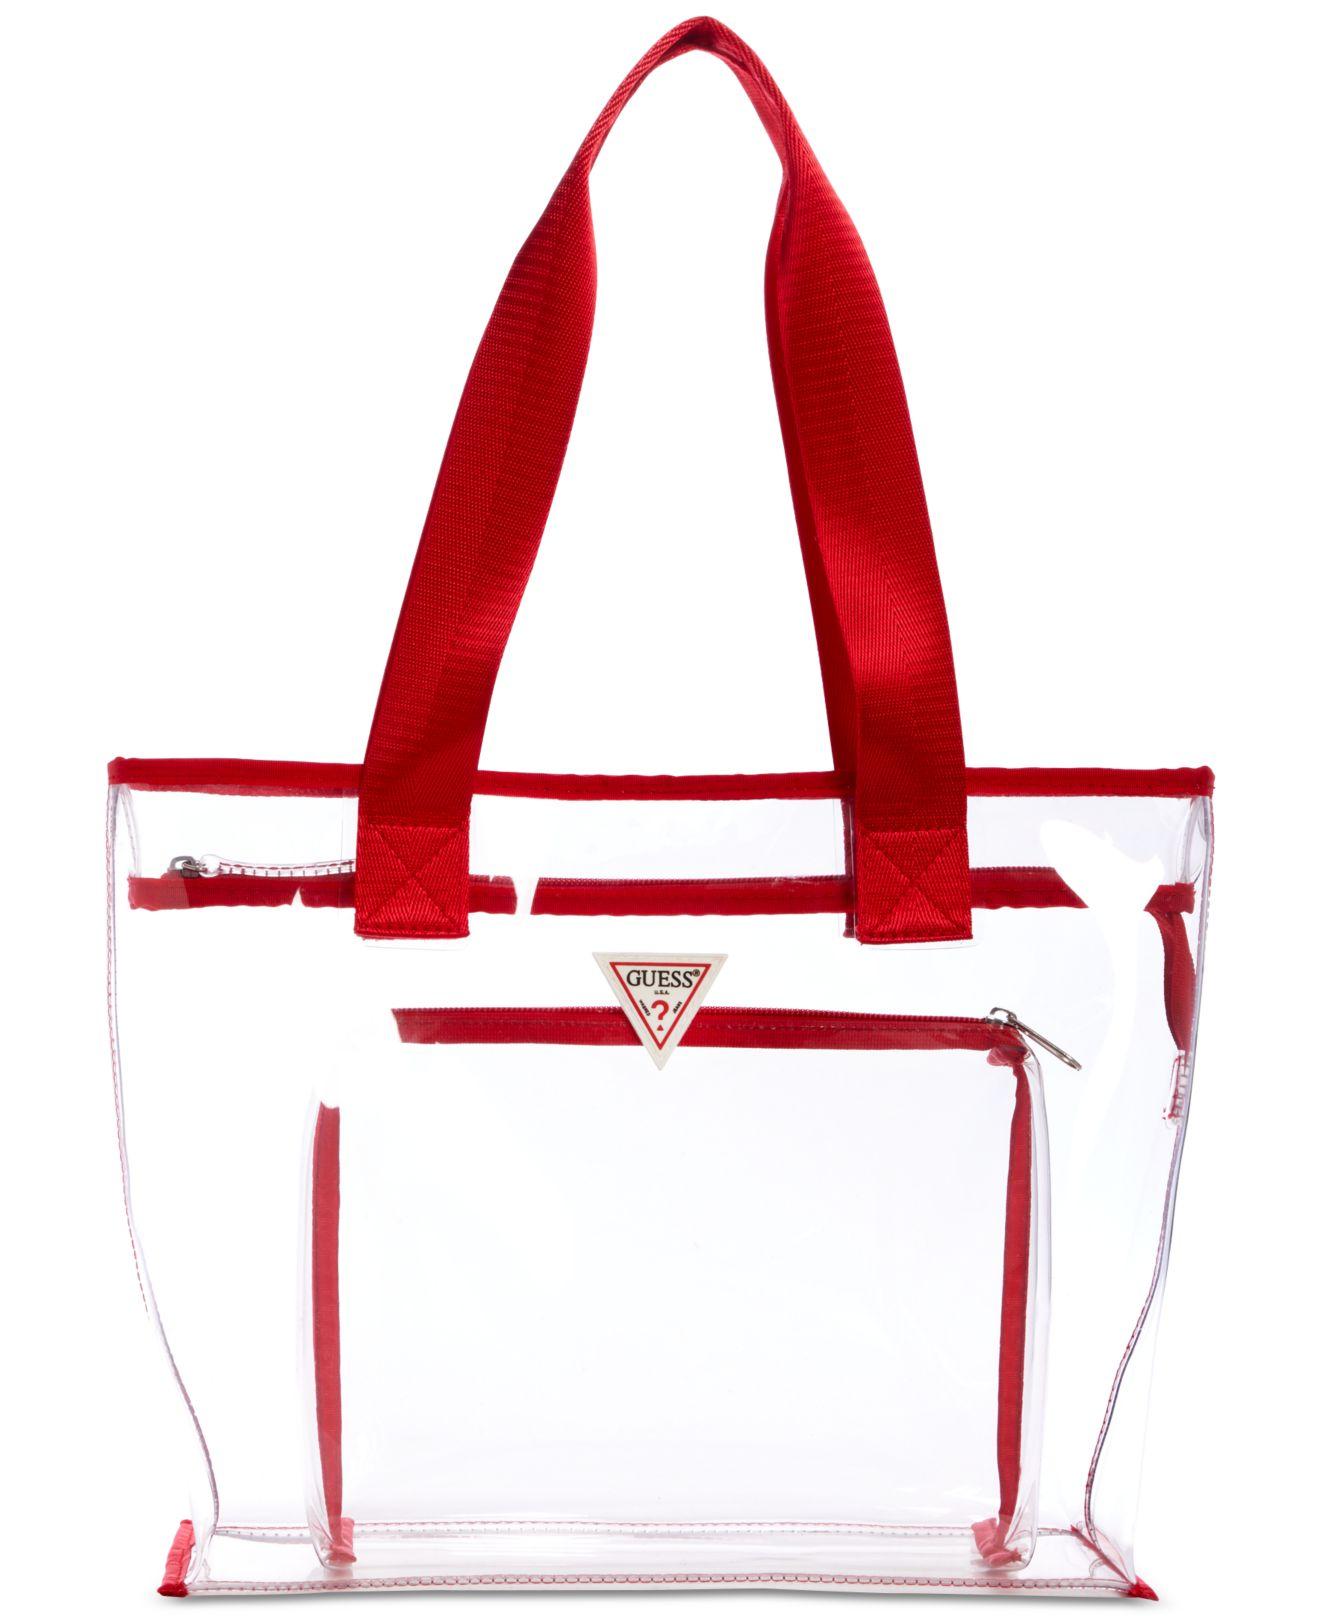 GUESS Shoulder Bag Red Bags & Handbags for Women for sale